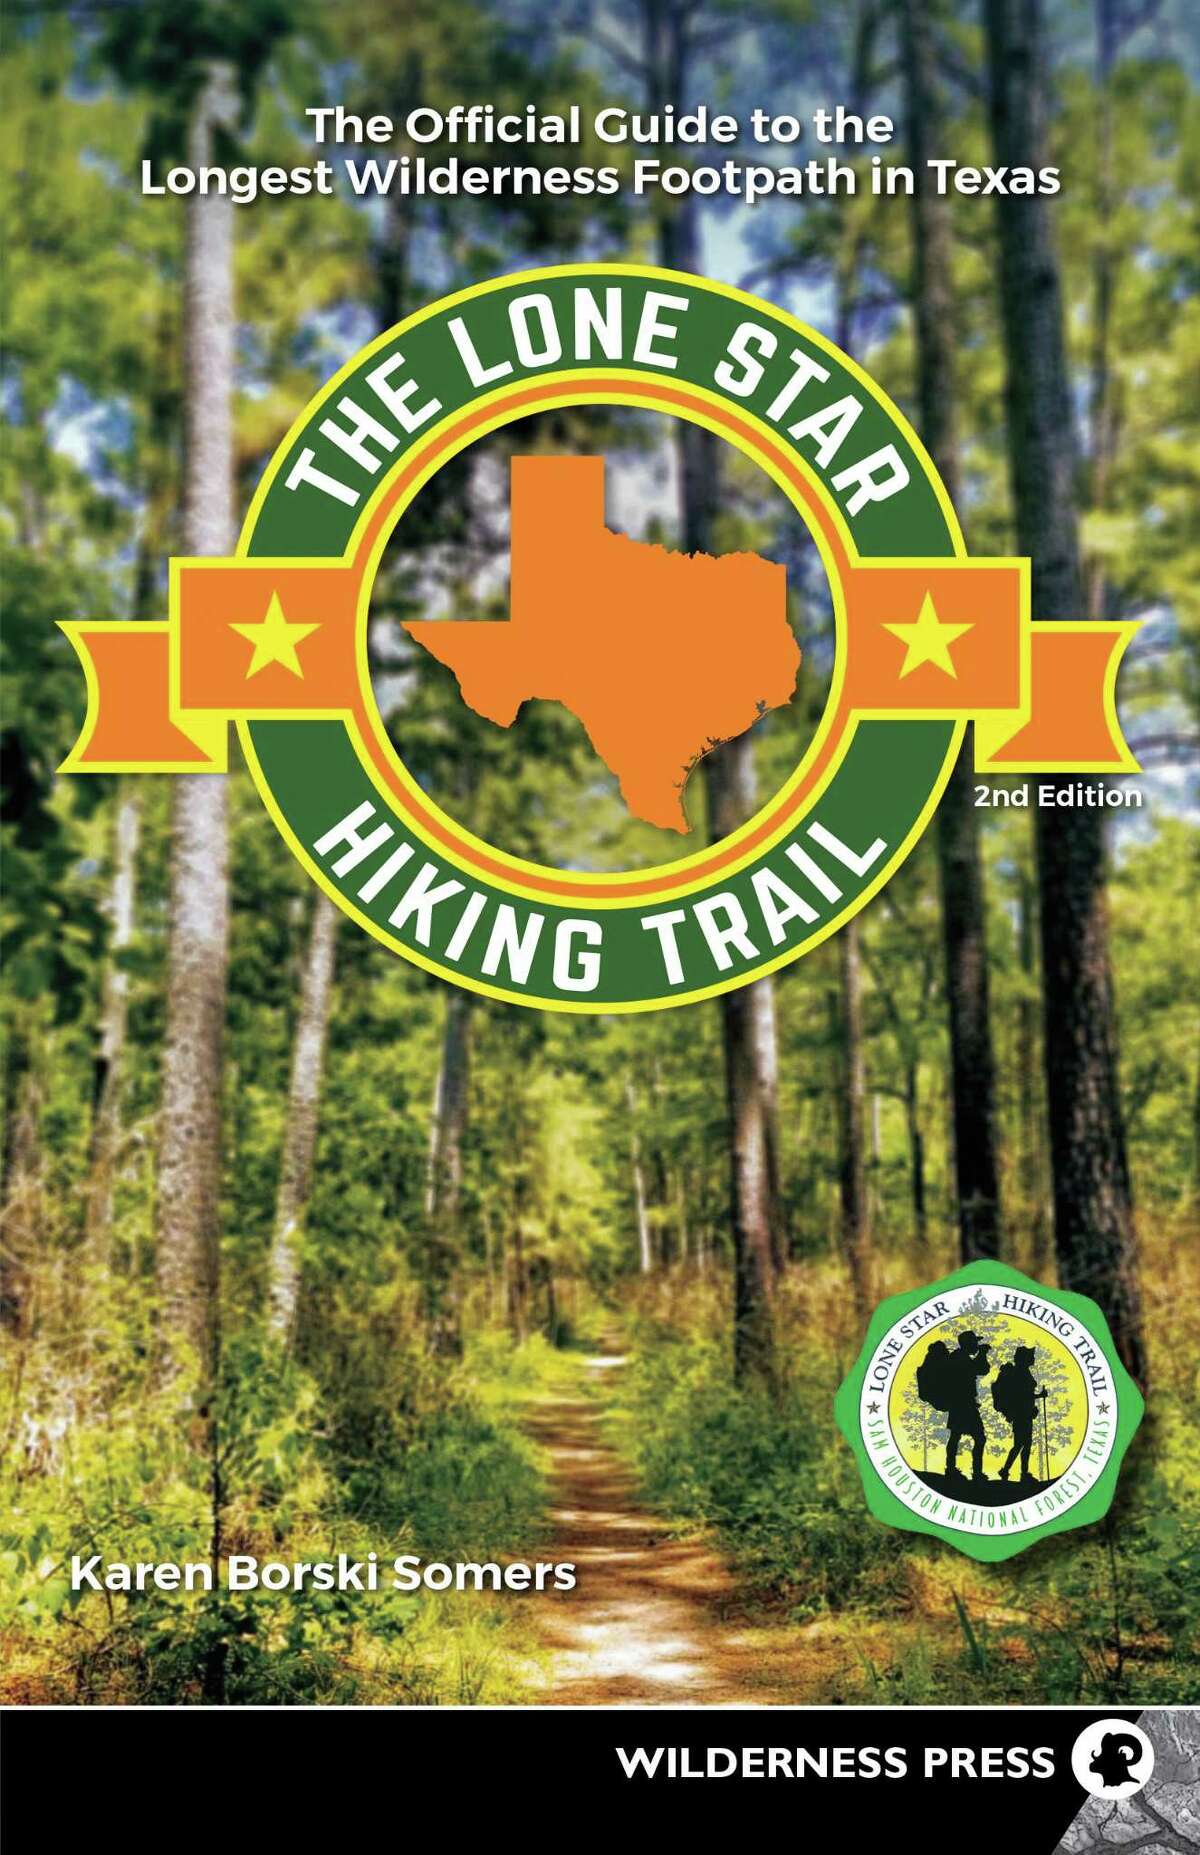 Spring native Karen Borski Somers has penned a book celebrating the Lone Star Hiking Trail as a hidden treasure.